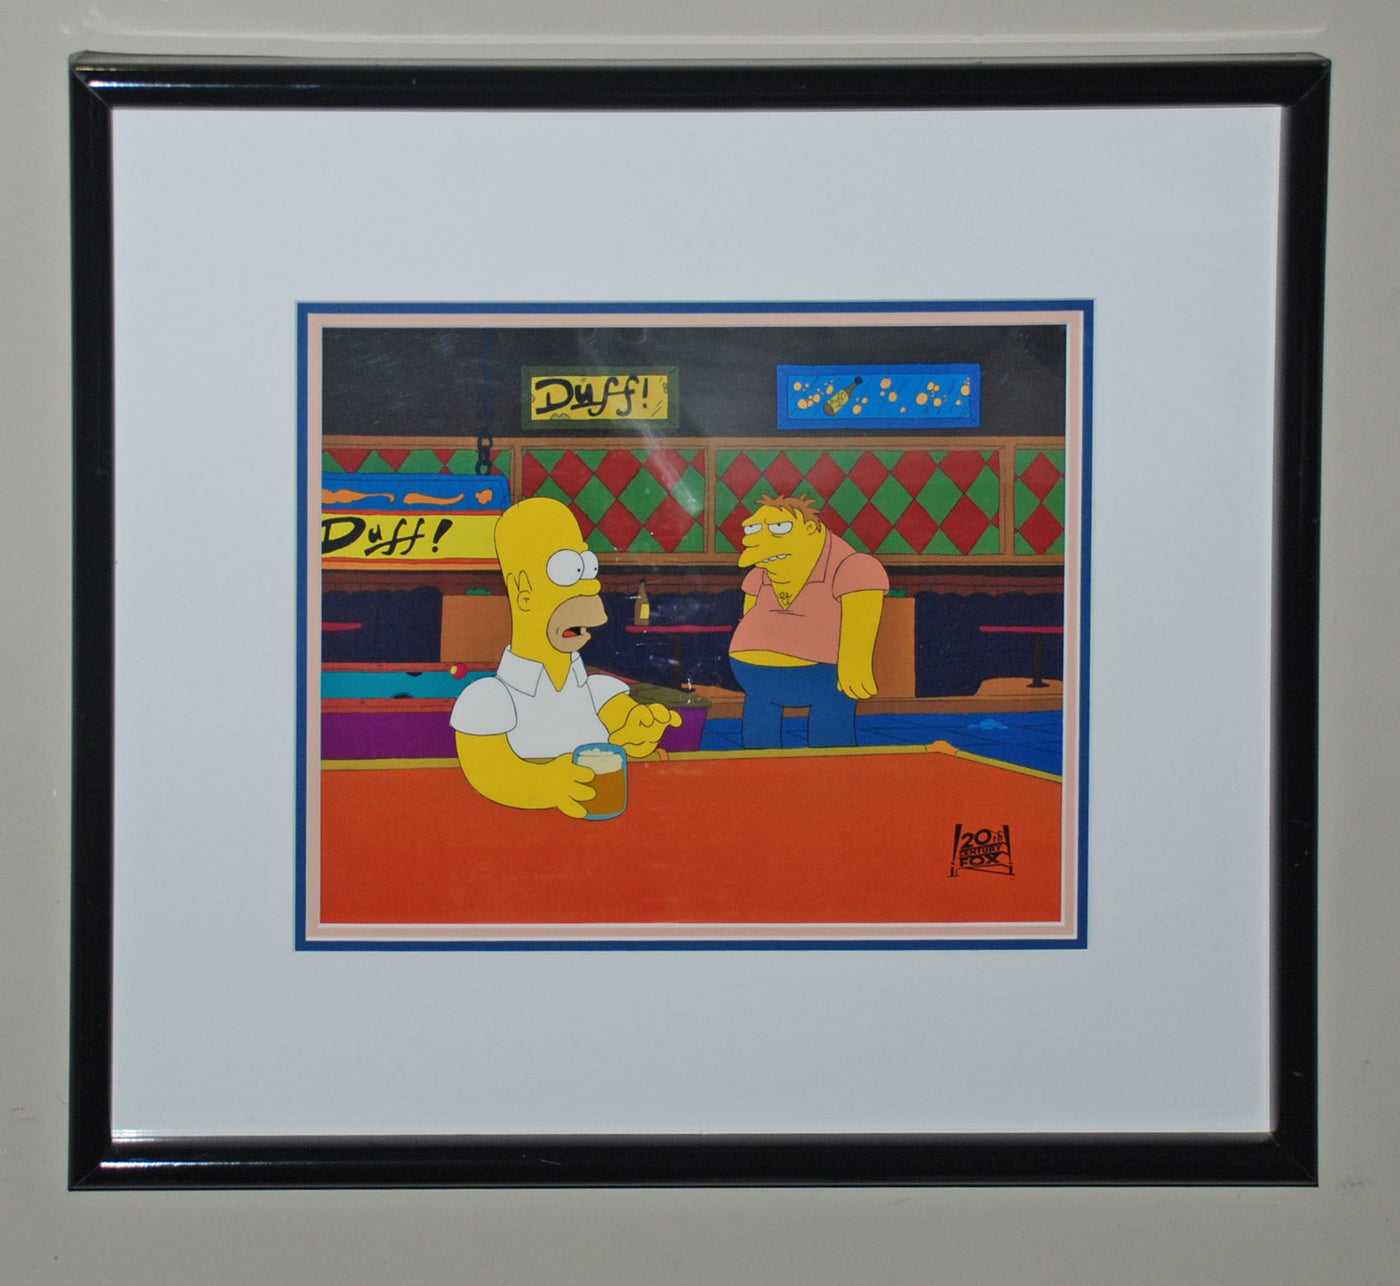 Original Simpsons Production Cel from the Simpsons